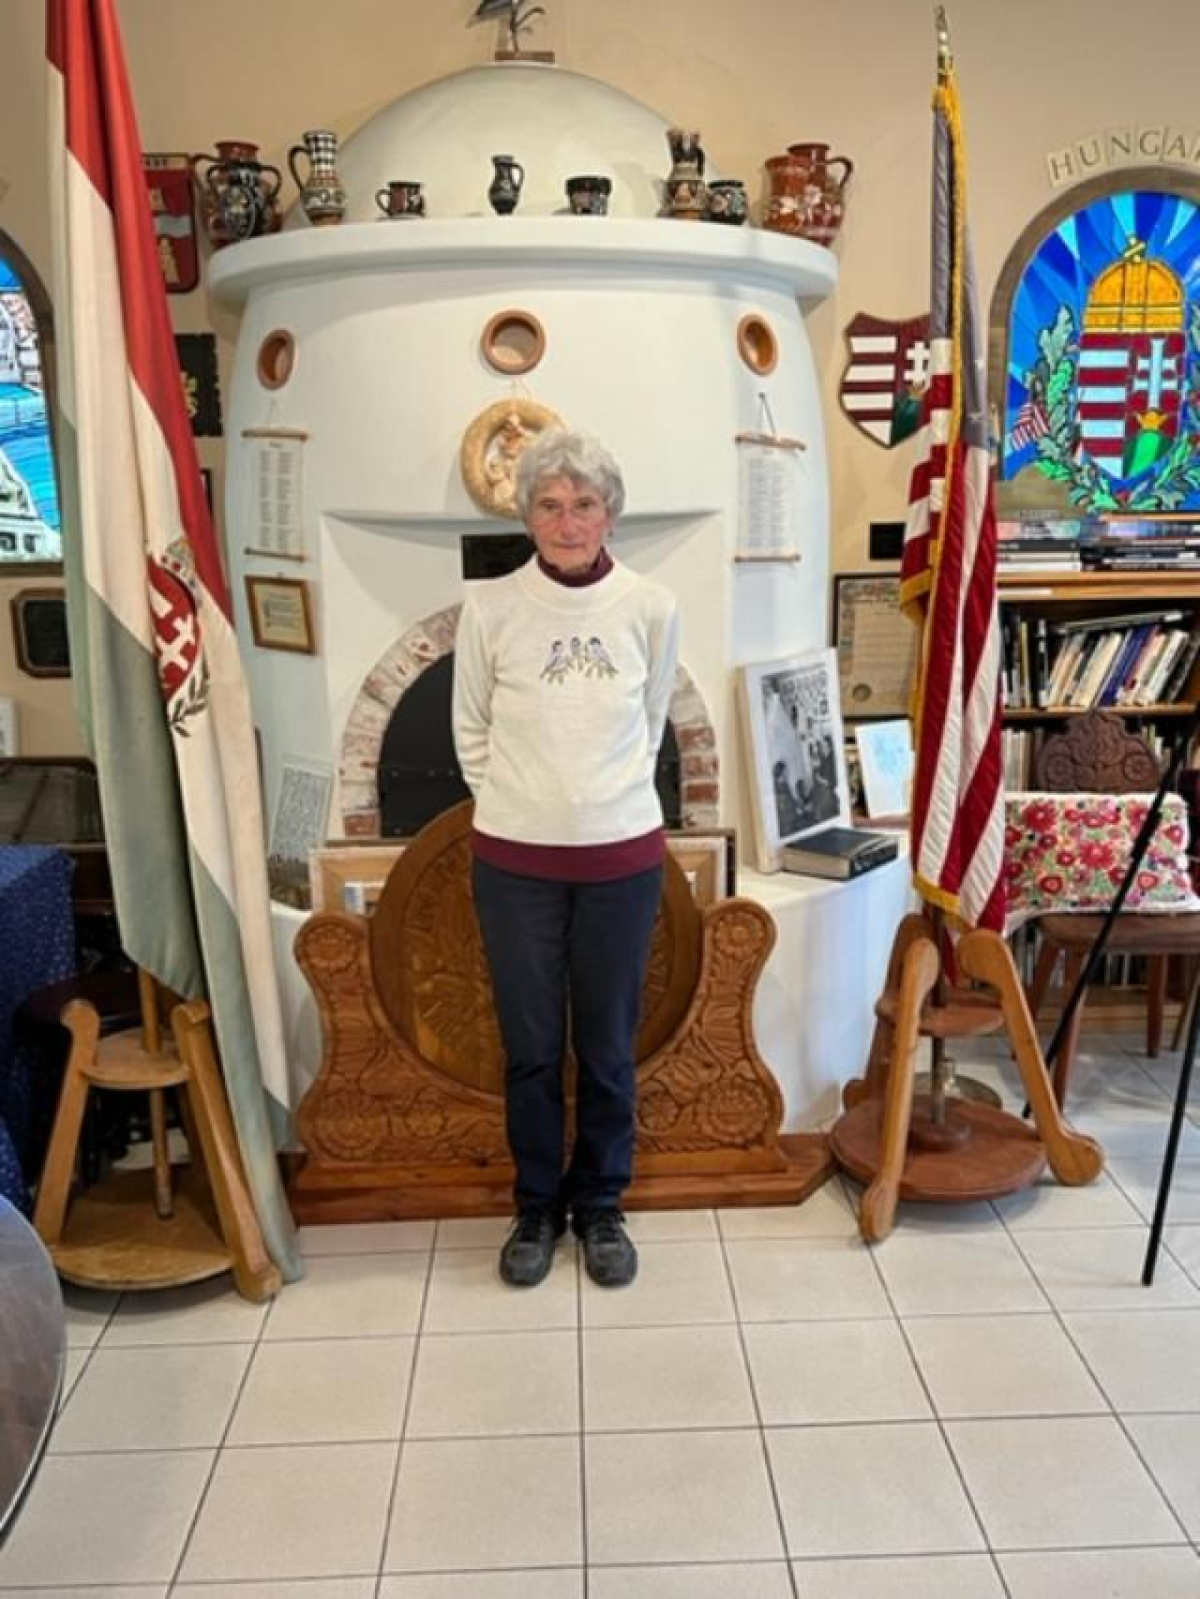 Clara Arvai shares stories of her homeland with visitors to the House of Hungary in Balboa Park.